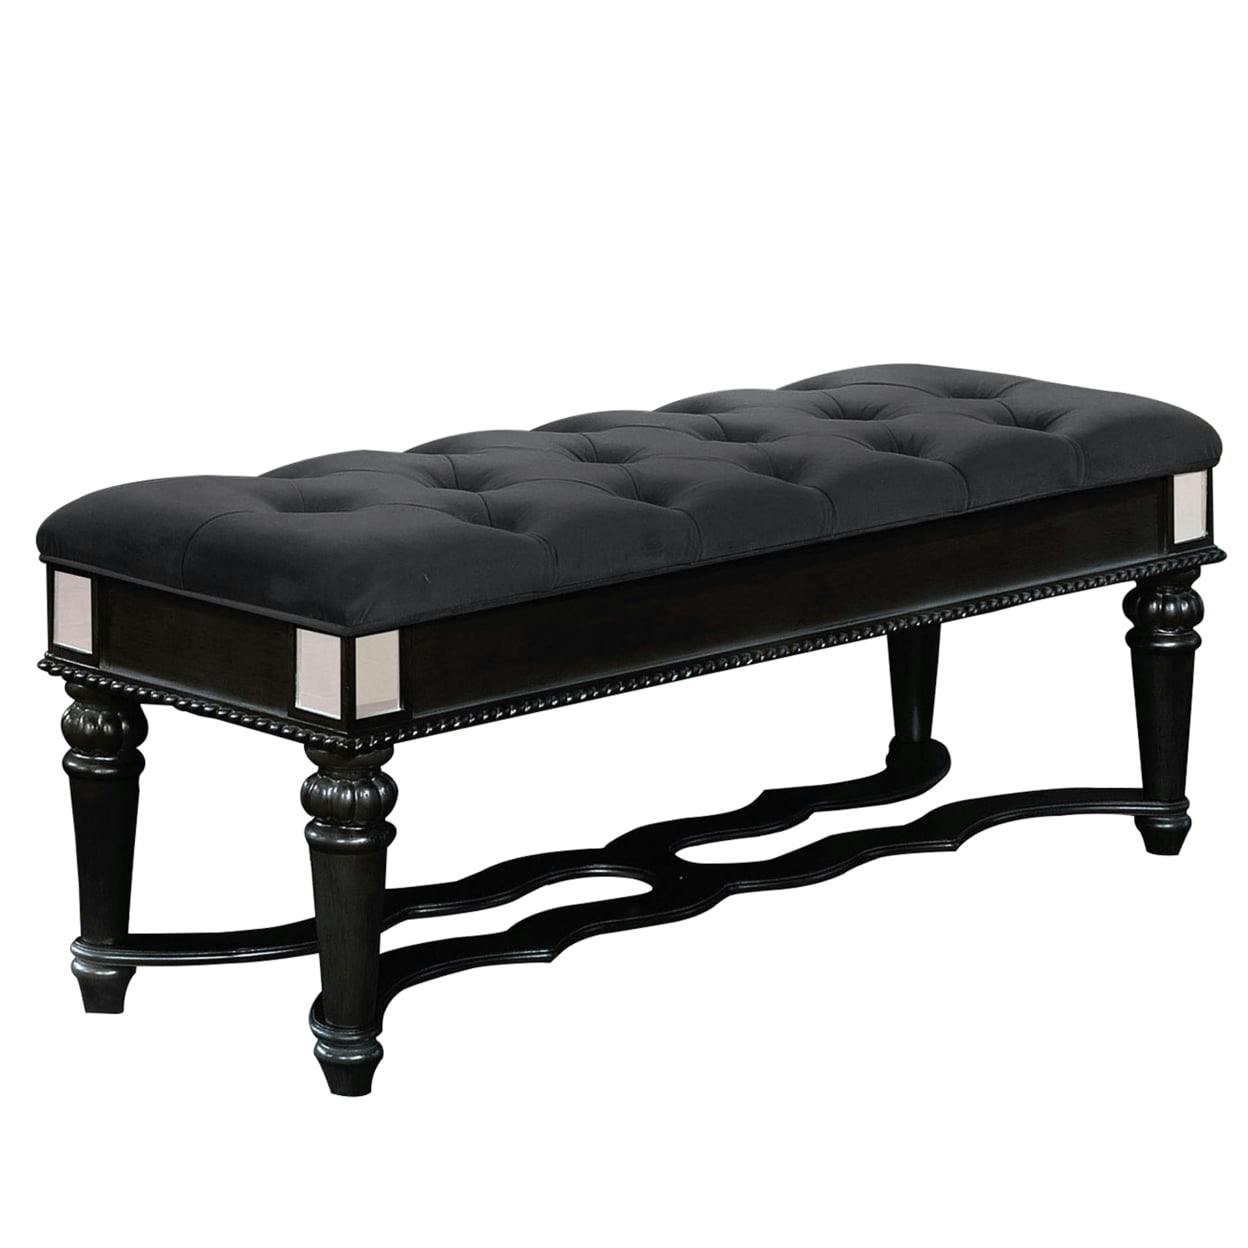 Elegant Black Fabric Padded Bench with Mirror Accents and Turned Legs